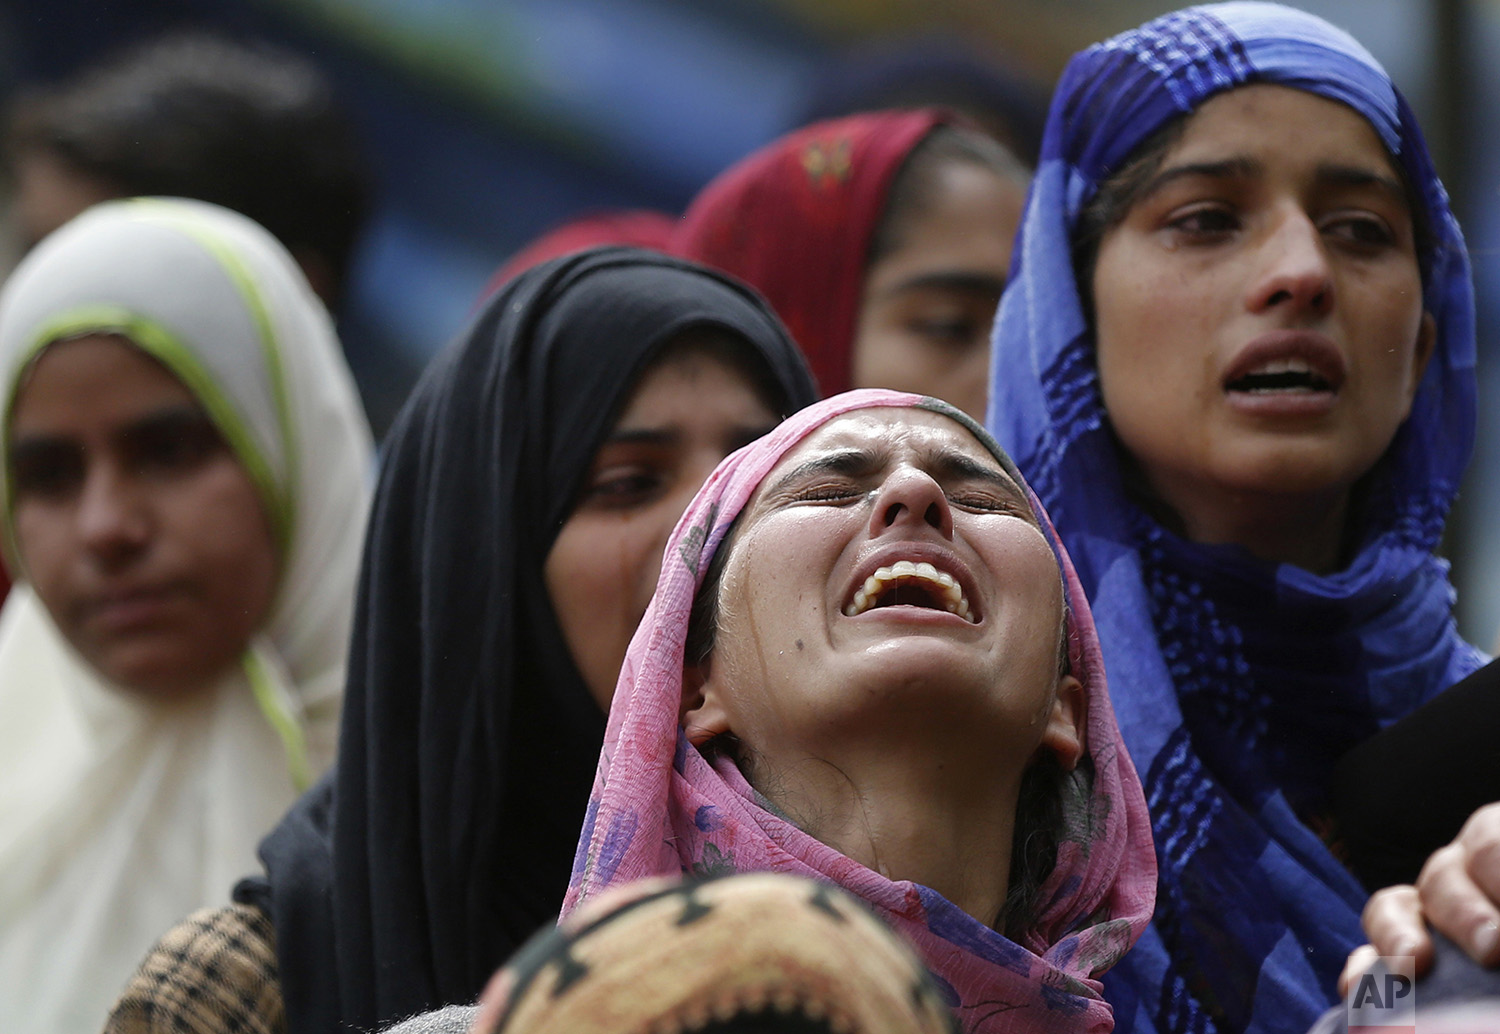 A relative cries near the body of killed rebel Jehinger Ahmad during his funeral at Keller, 49 kilometers (30 miles) south of Srinagar, Indian controlled Kashmir, Tuesday, July 4, 2017. (AP Photo/Mukhtar Khan)